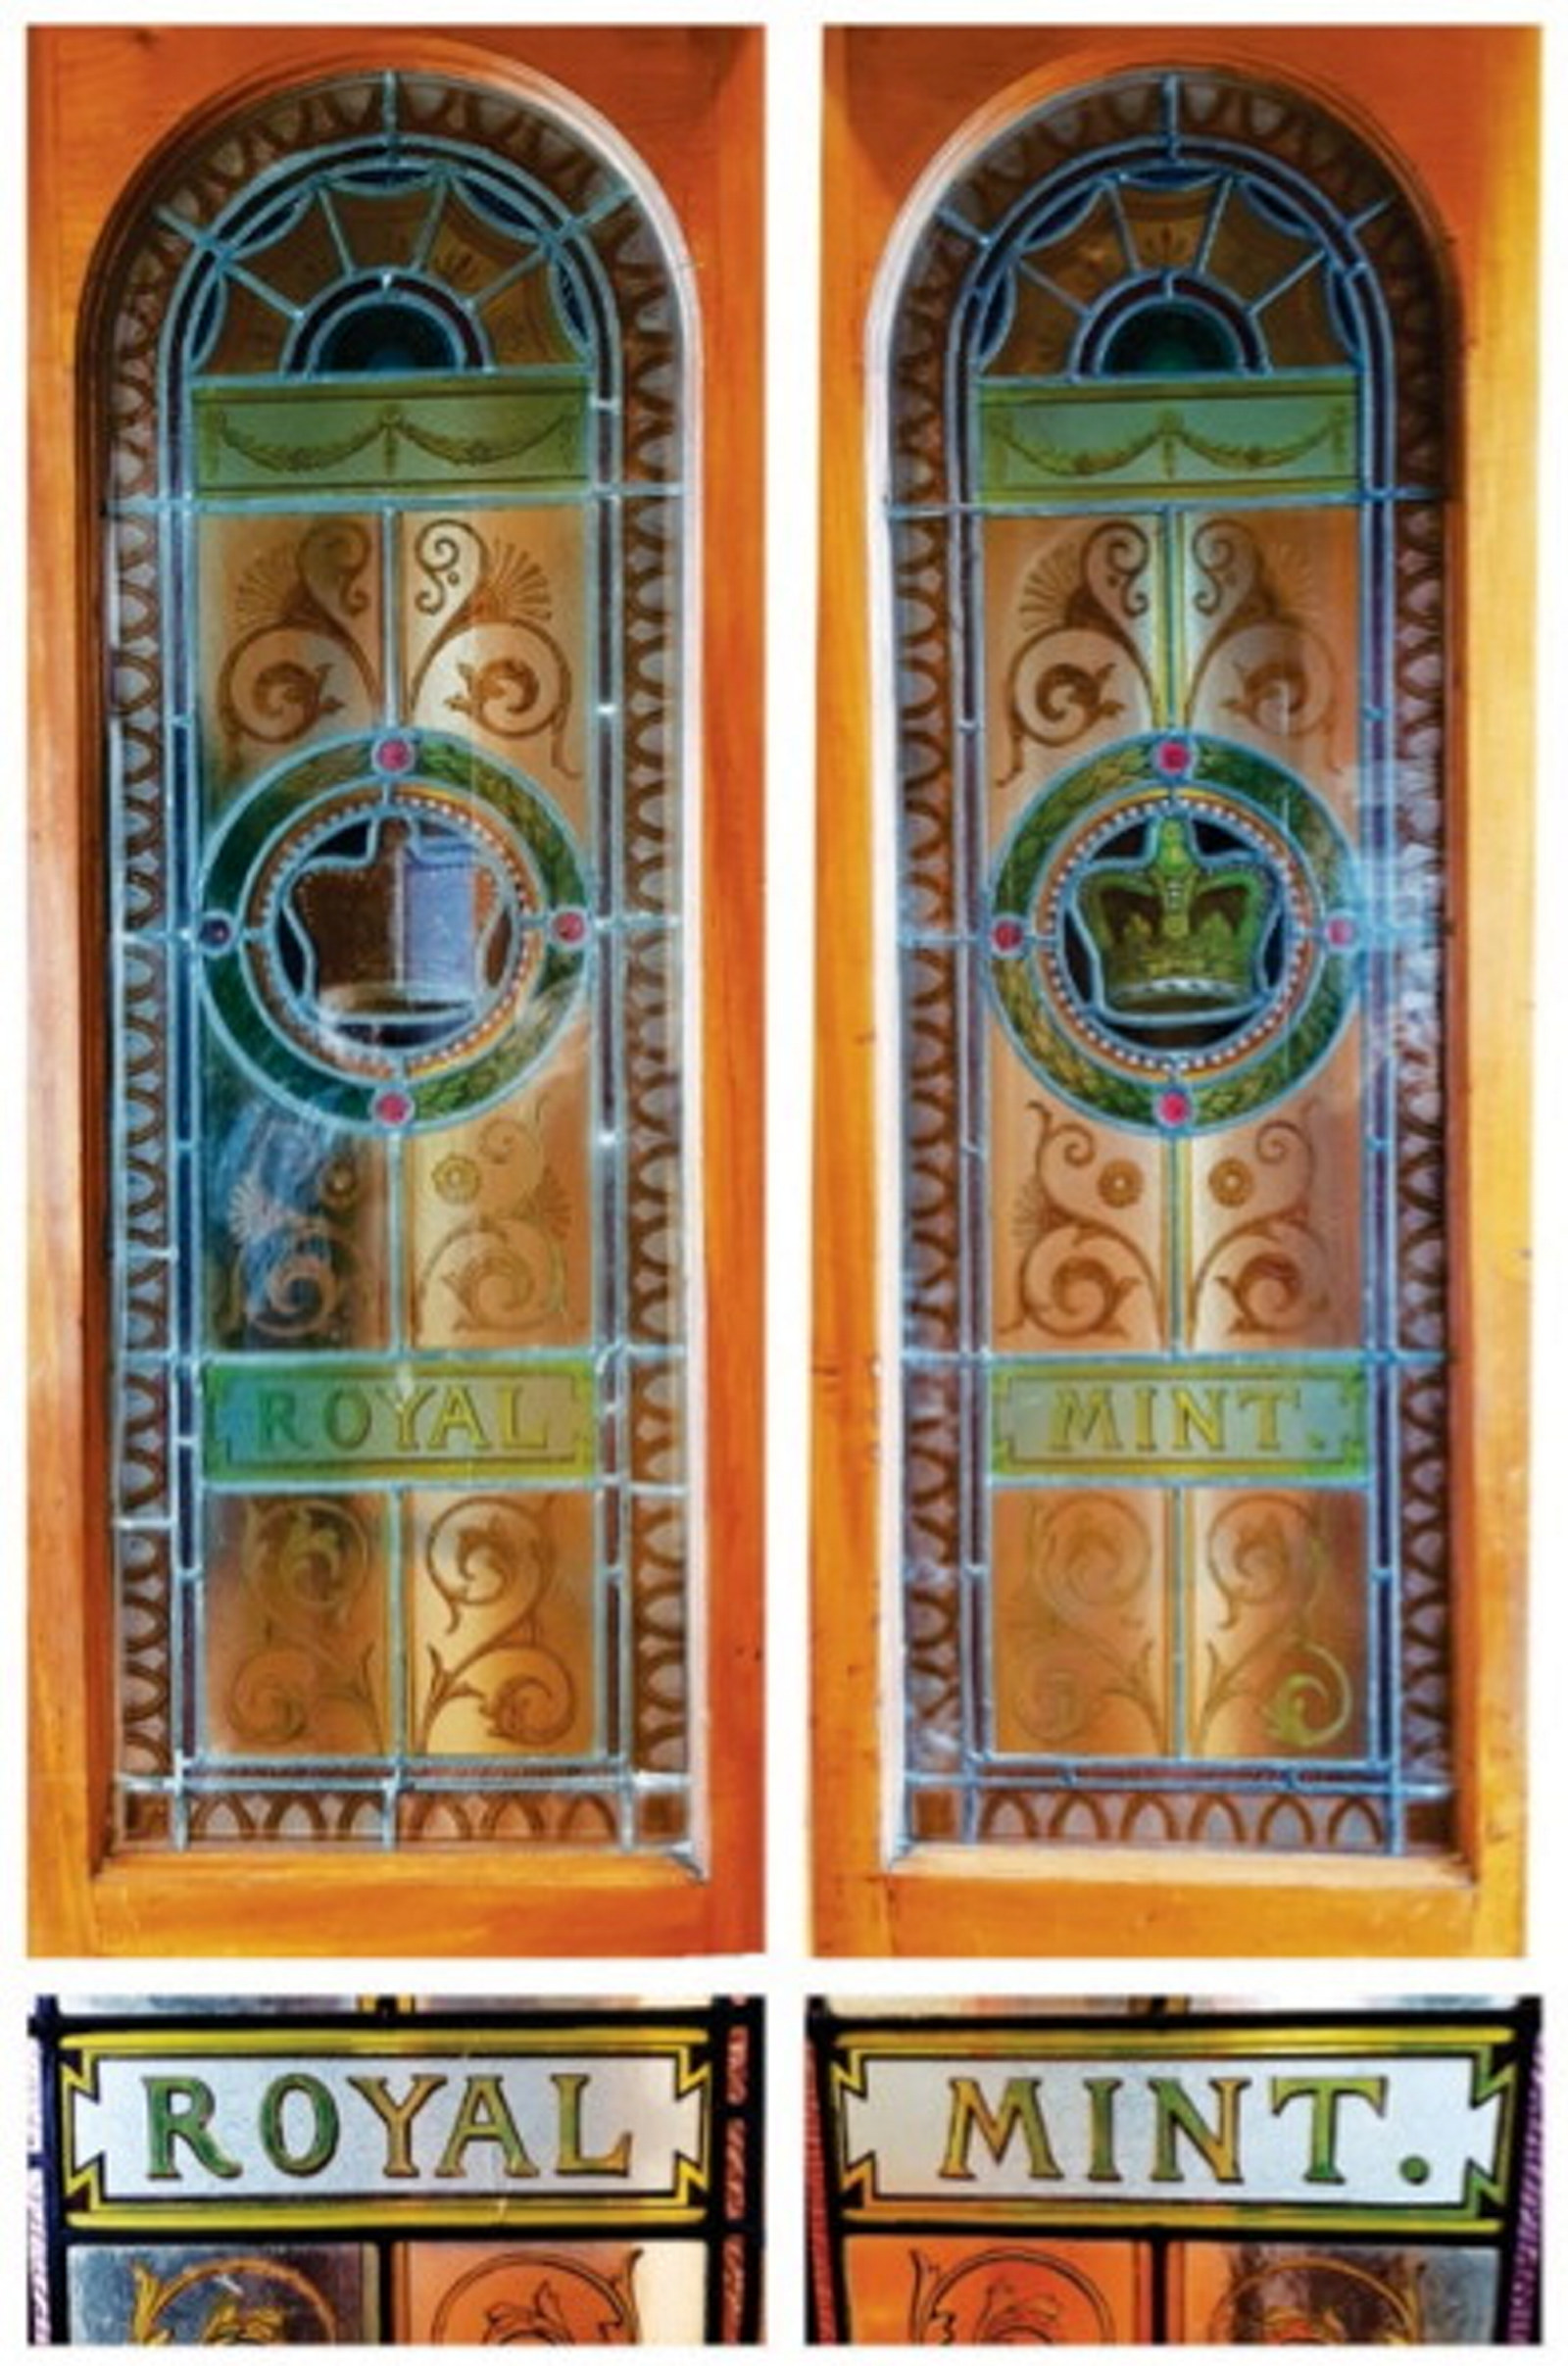 The colourful stained glass entry doors at The Mint, featuring a crown in the centre with the words 'Royal Mint'